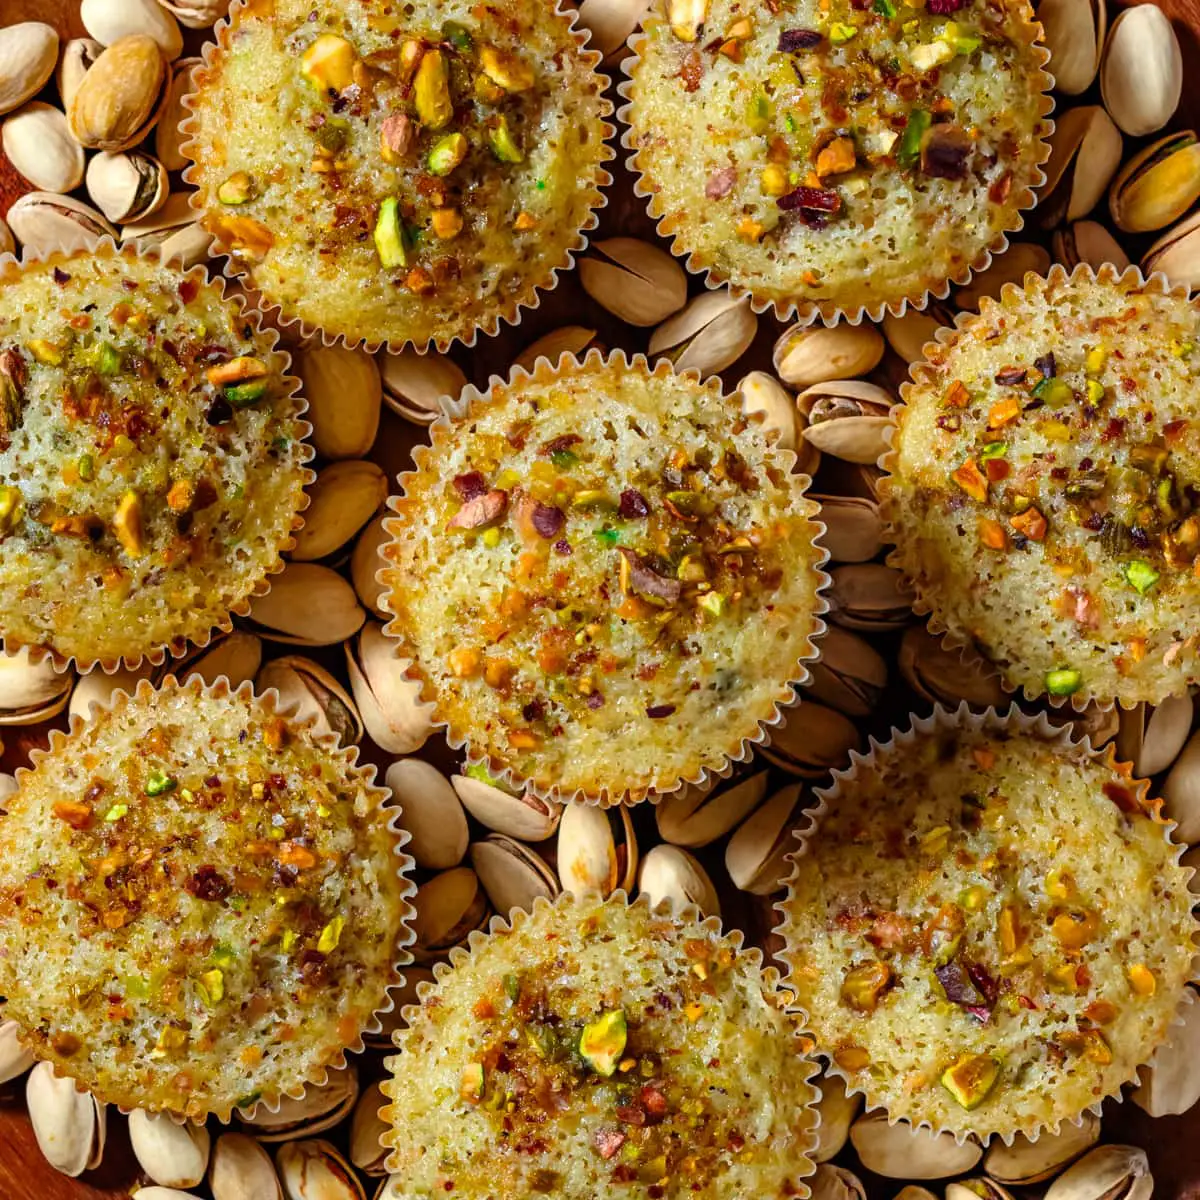 pistachio muffins on plate close up